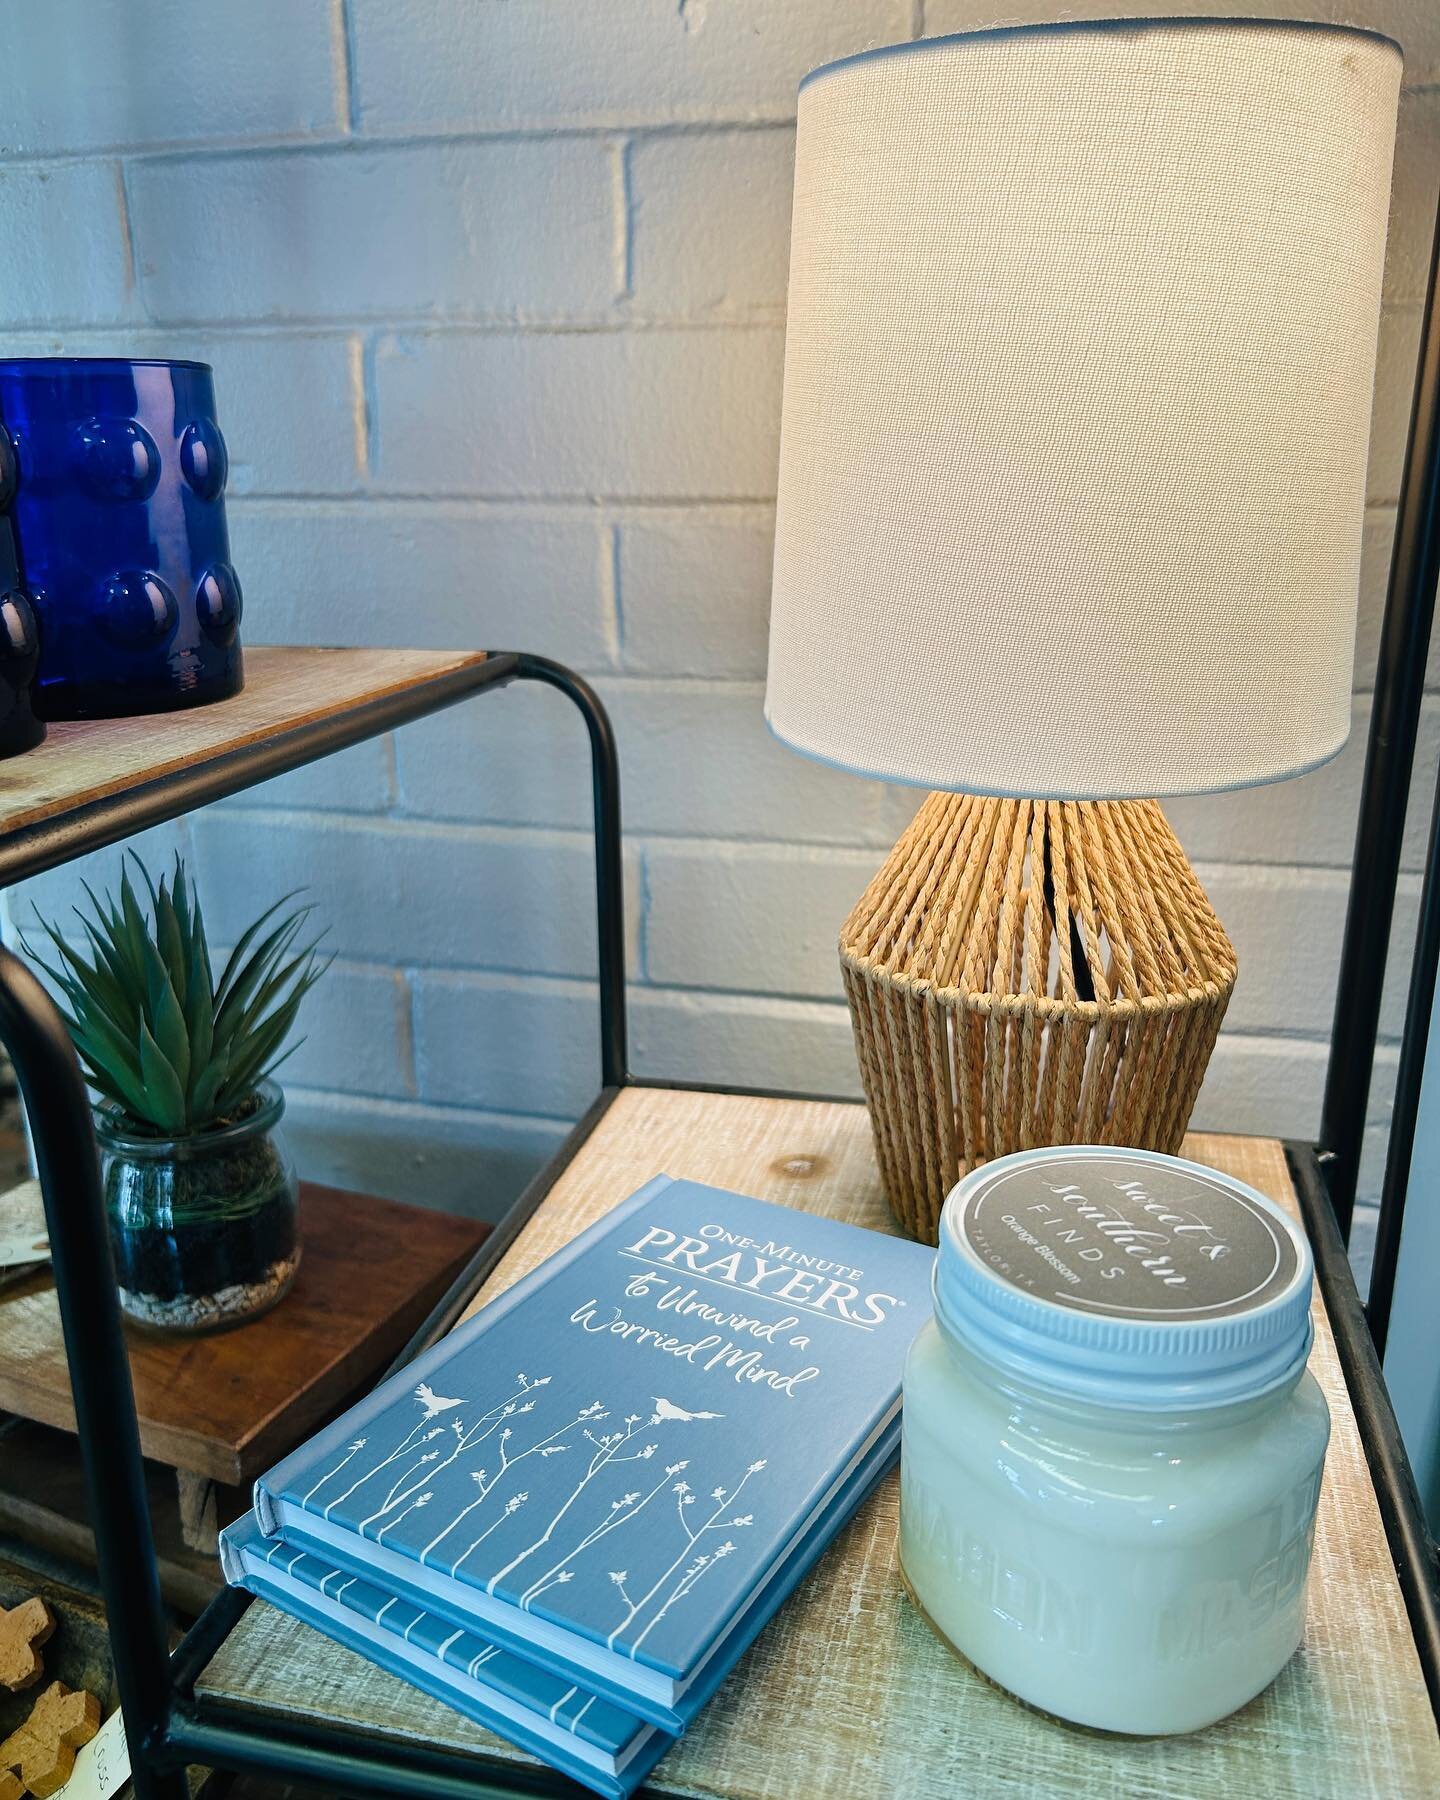 Brighten this gloomy day &amp; come see us! ✨ We are OPEN Today 10-5! 
.
.
#farmhouseliving #homelovers #ilovemyhome #farmhousedecorating #farmhousetable #fixerupperstyle #sweetandsouthernfinds #aliltownalottalove #shopsmallbusiness #taylortx #homede